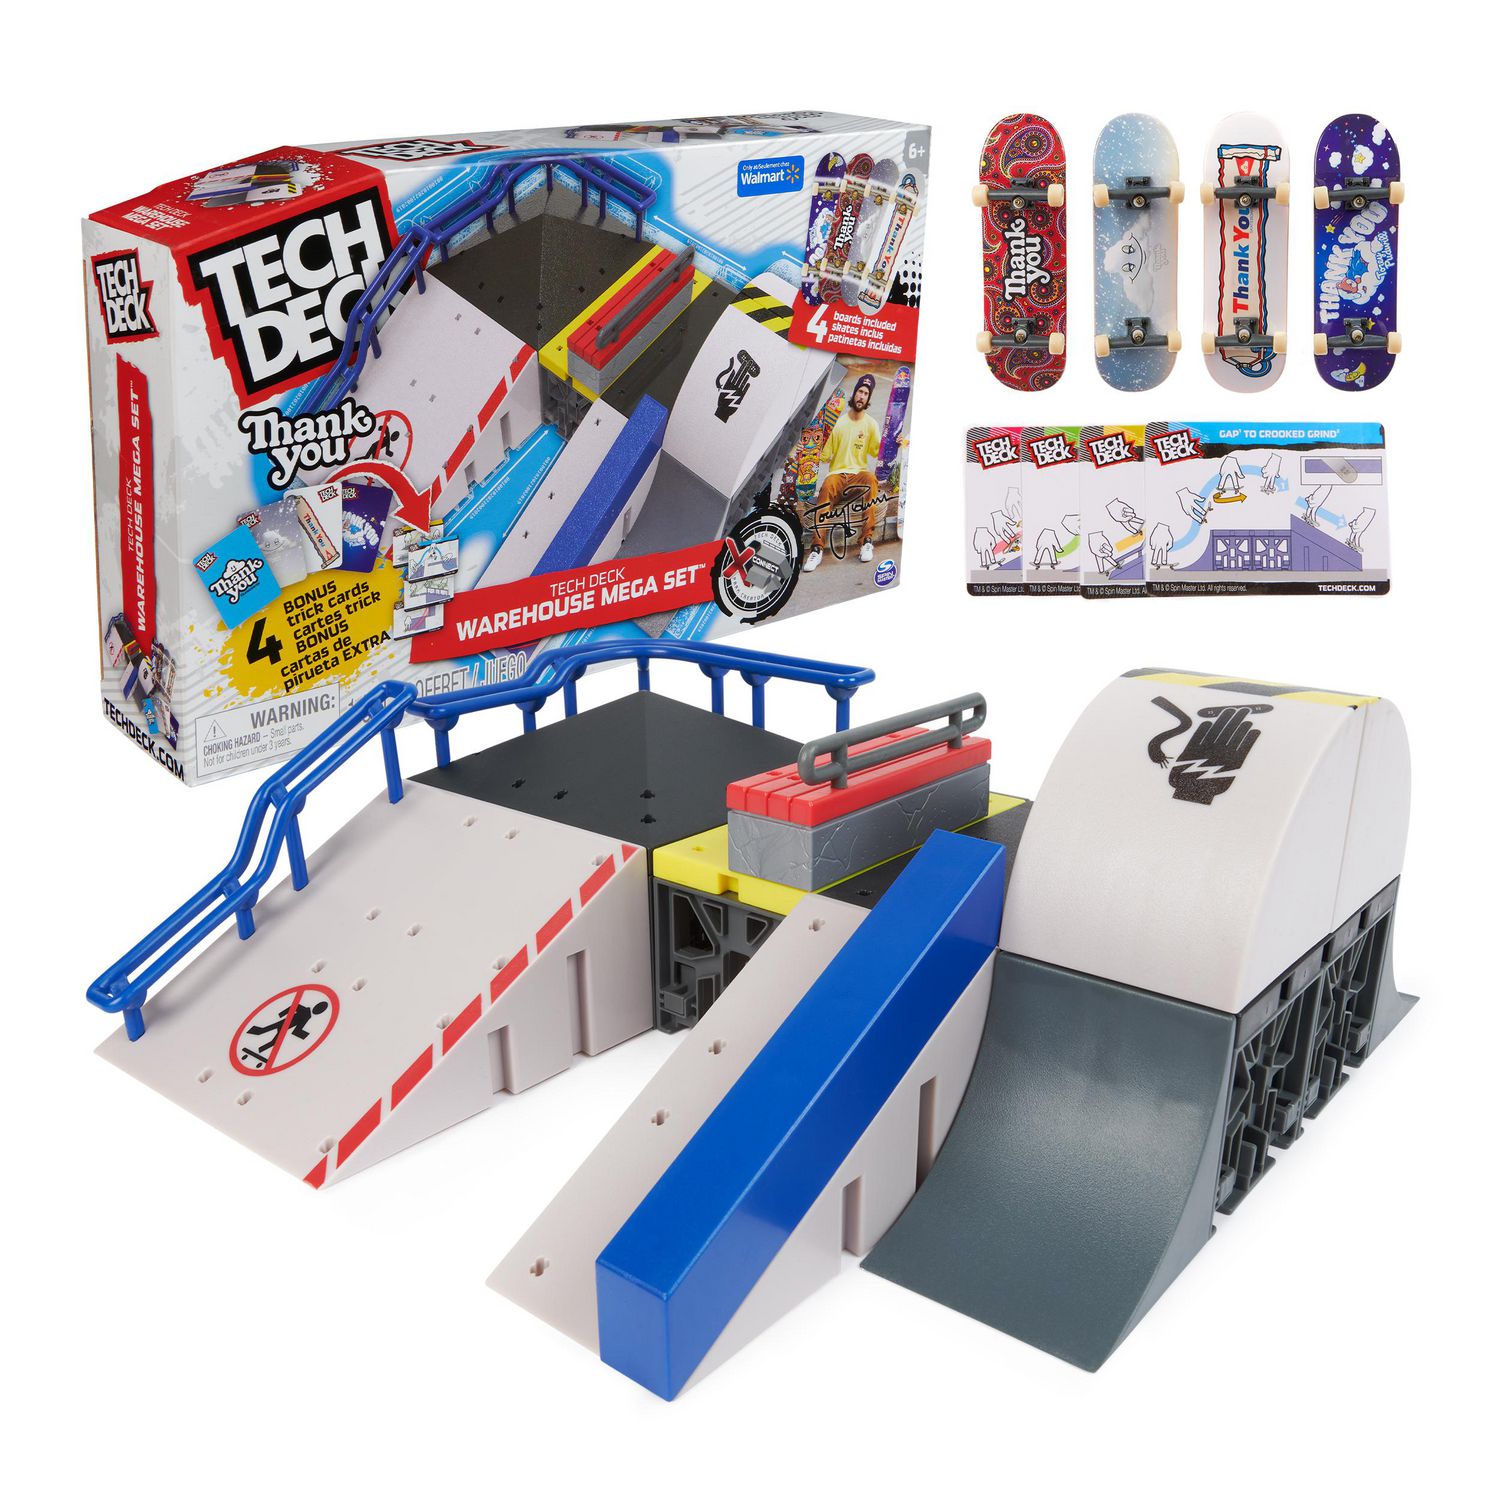 Tech Deck, Warehouse Mega Set with 4 Exclusive Fingerboards and 